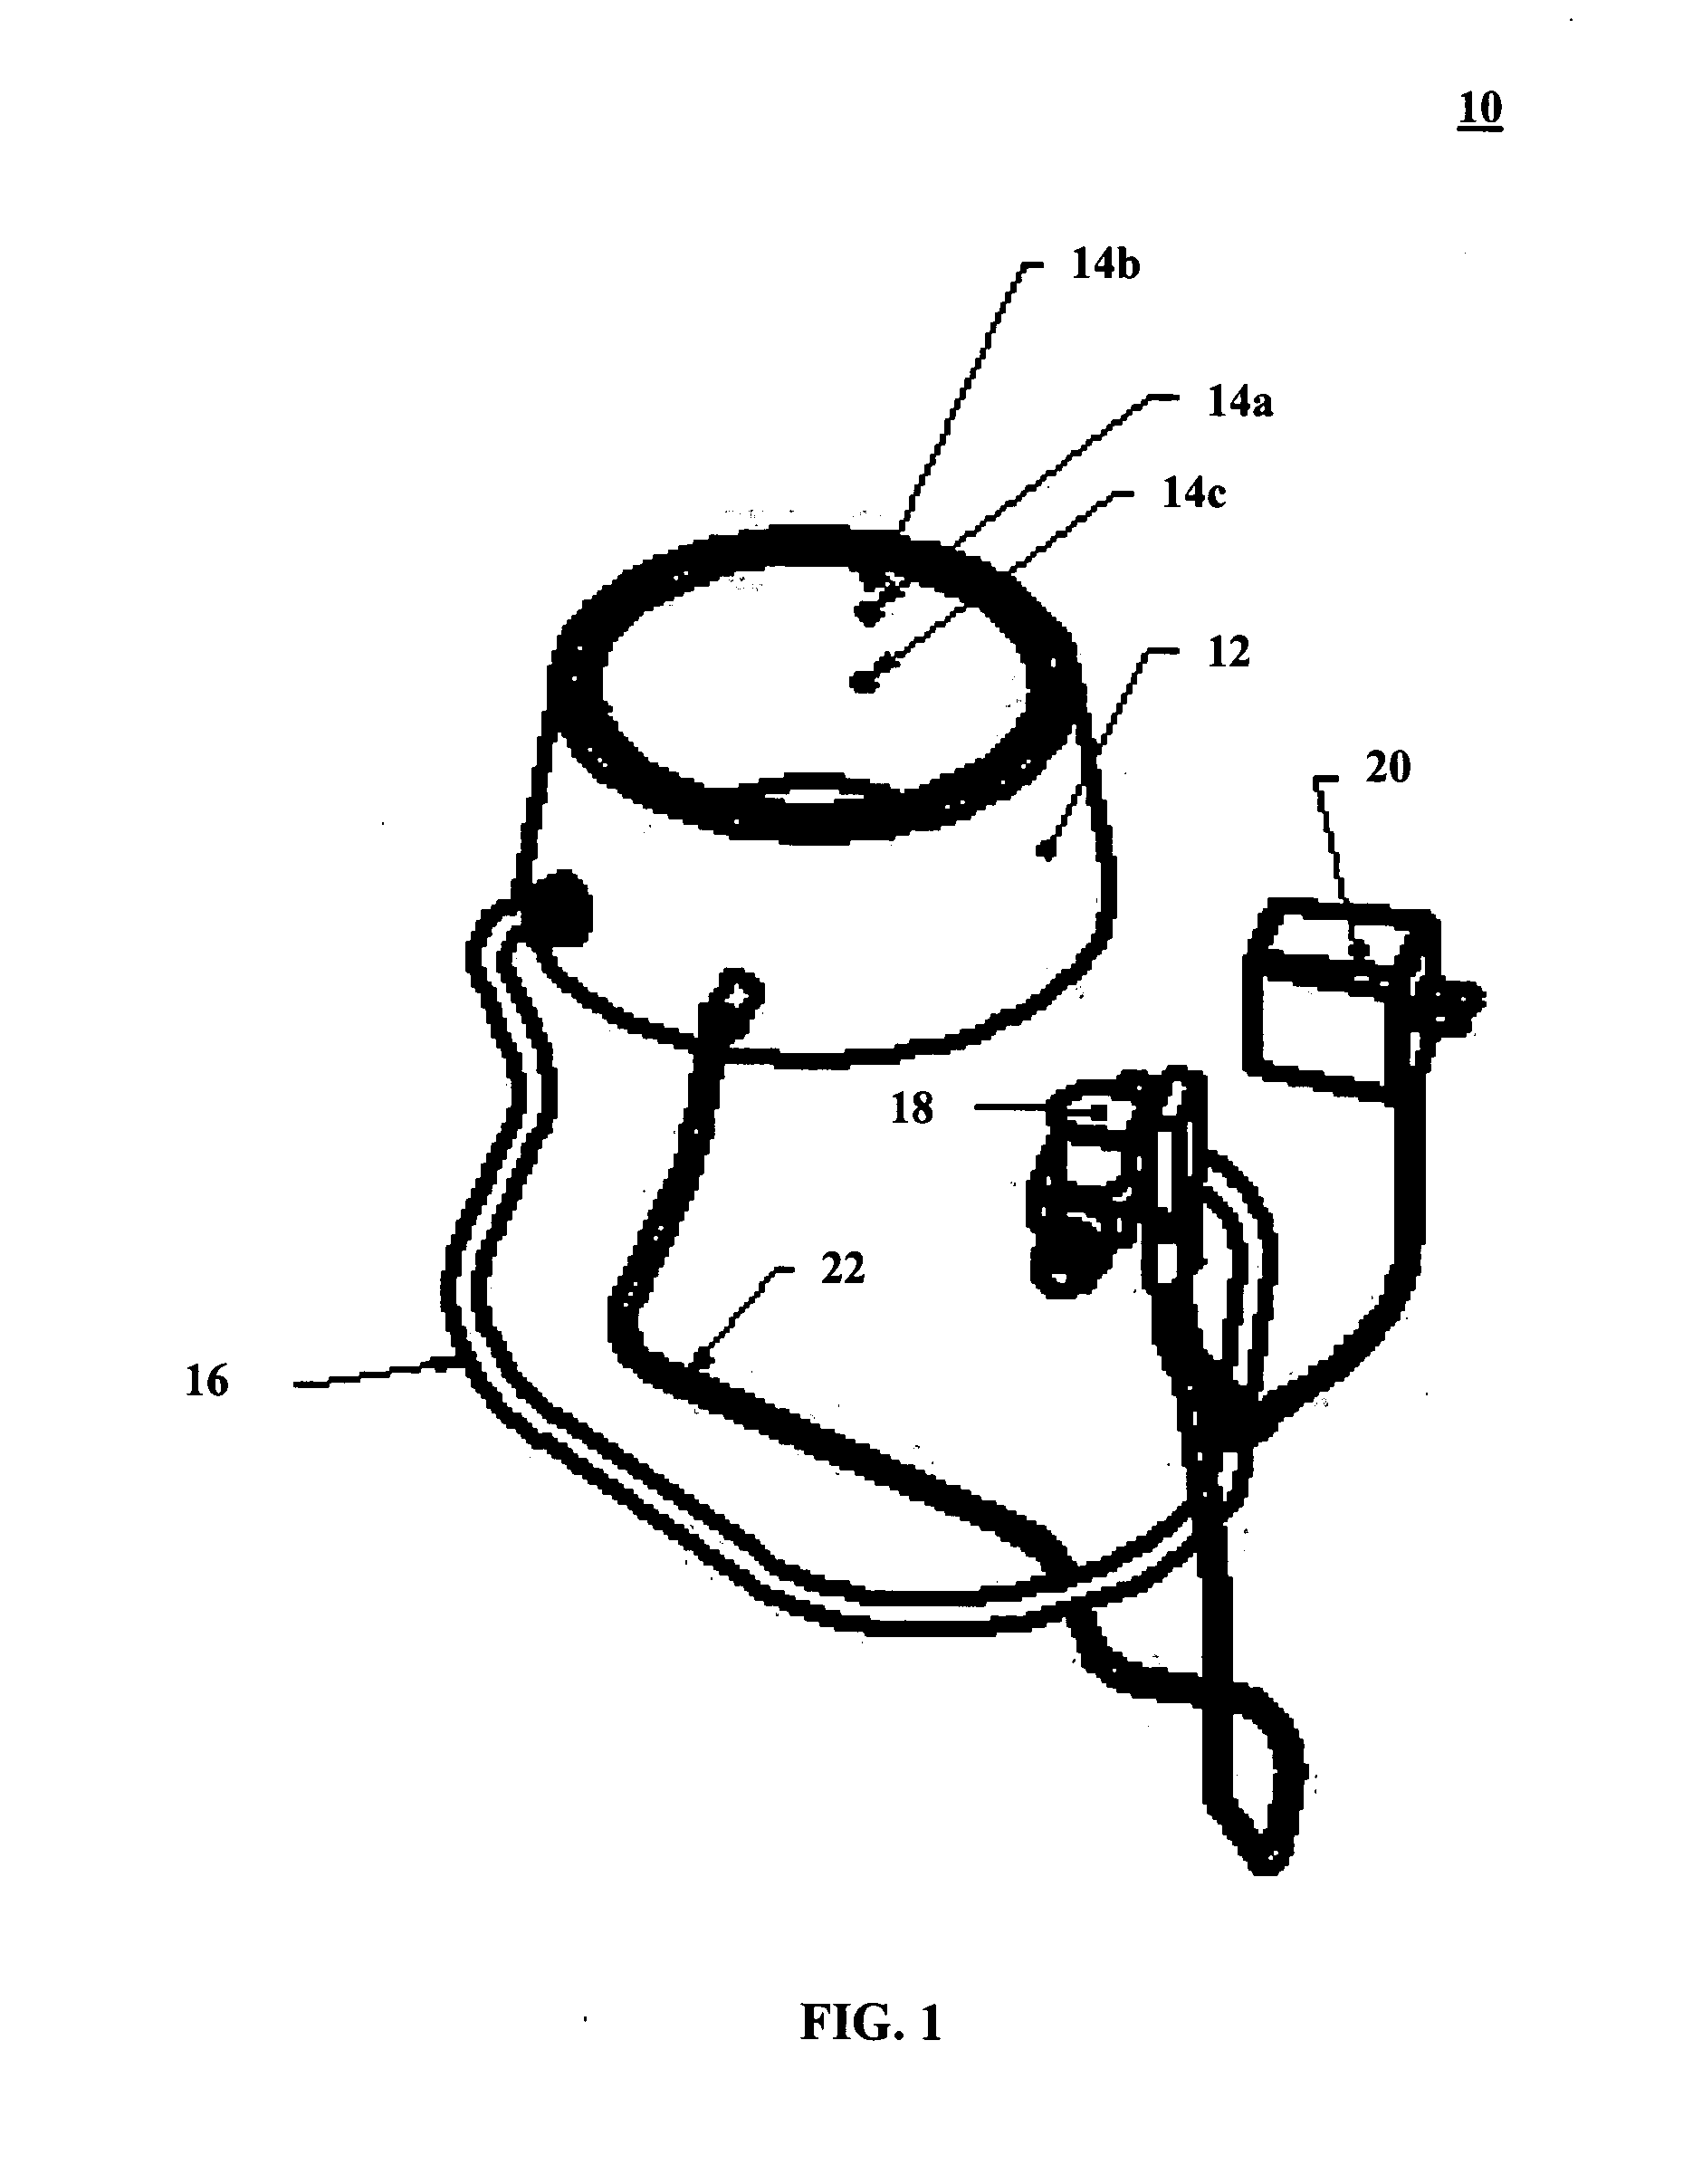 Automatic smart watering apparatus